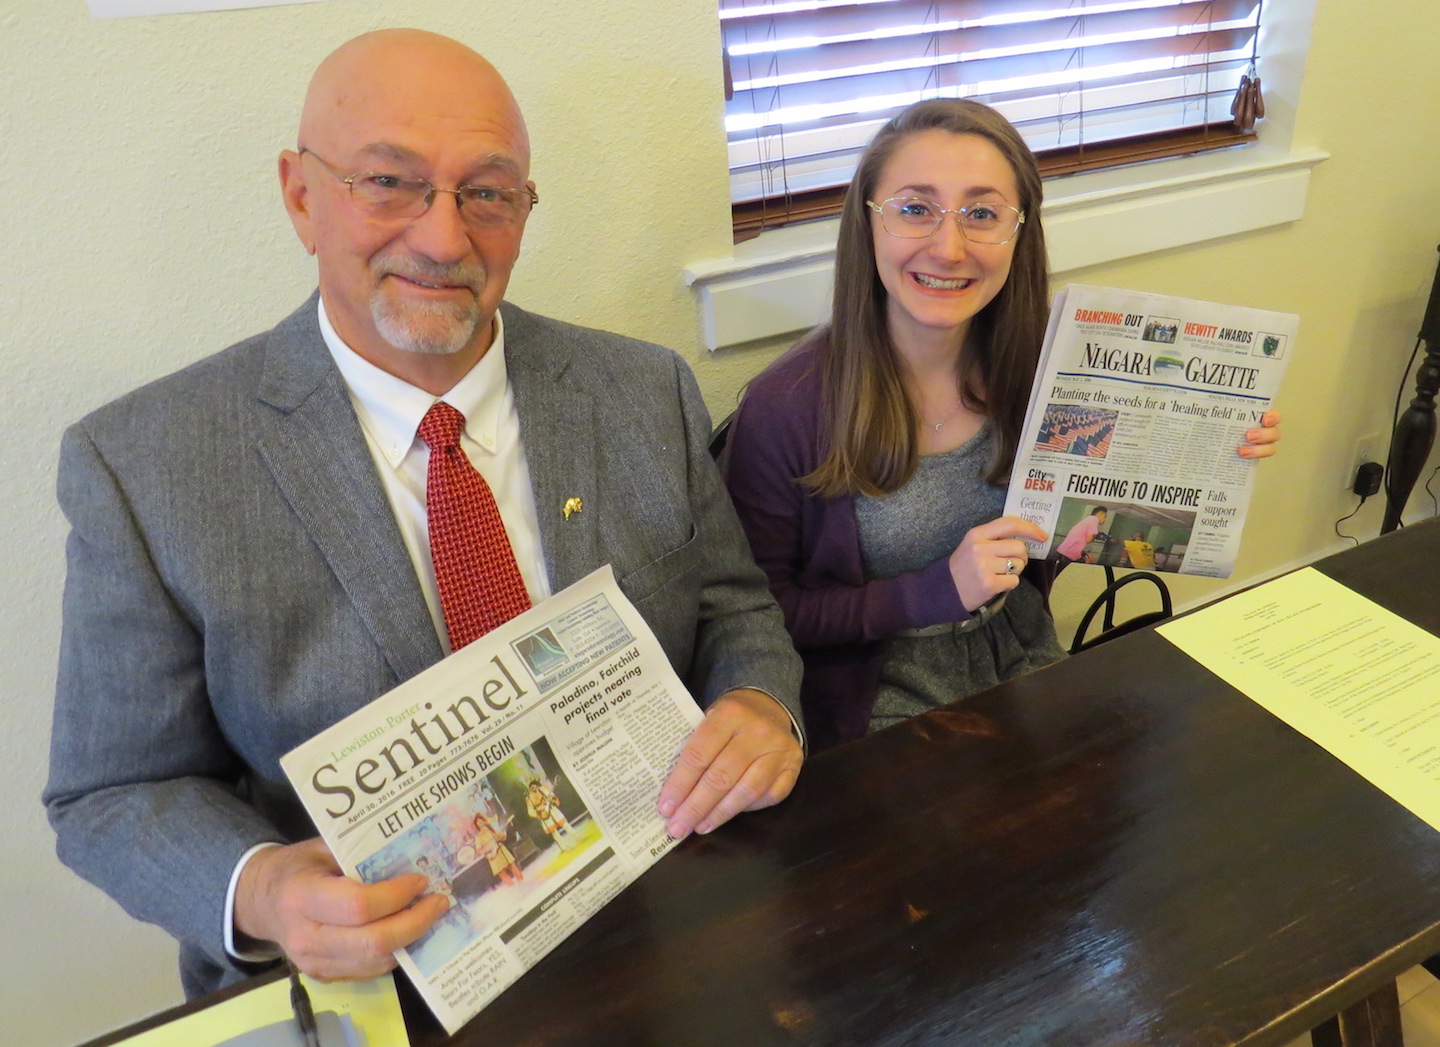 Bruce Sutherland, sitting in Joshua Maloni's seat, holds a copy of The Sentinel, while Joan McDonough, a reporter for the Niagara Gazette, hold a copy of her newspaper.